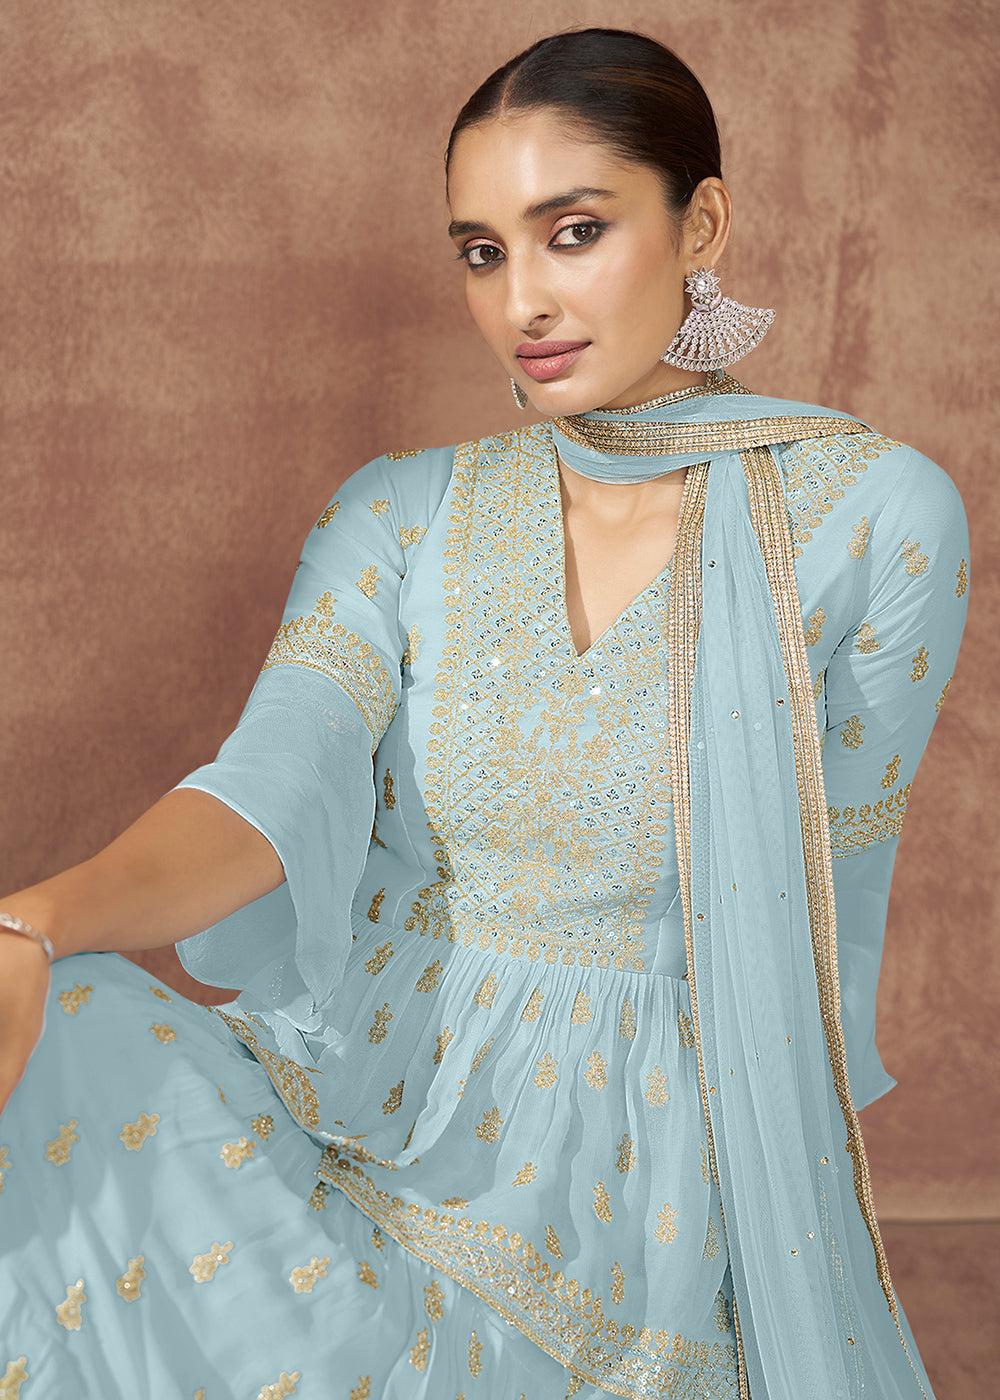 Shop Now Sky Blue Georgette Party Trendy Peplum Lehenga Choli with Jacket Online in USA, UK, Canada & Worldwide at Empress Clothing.